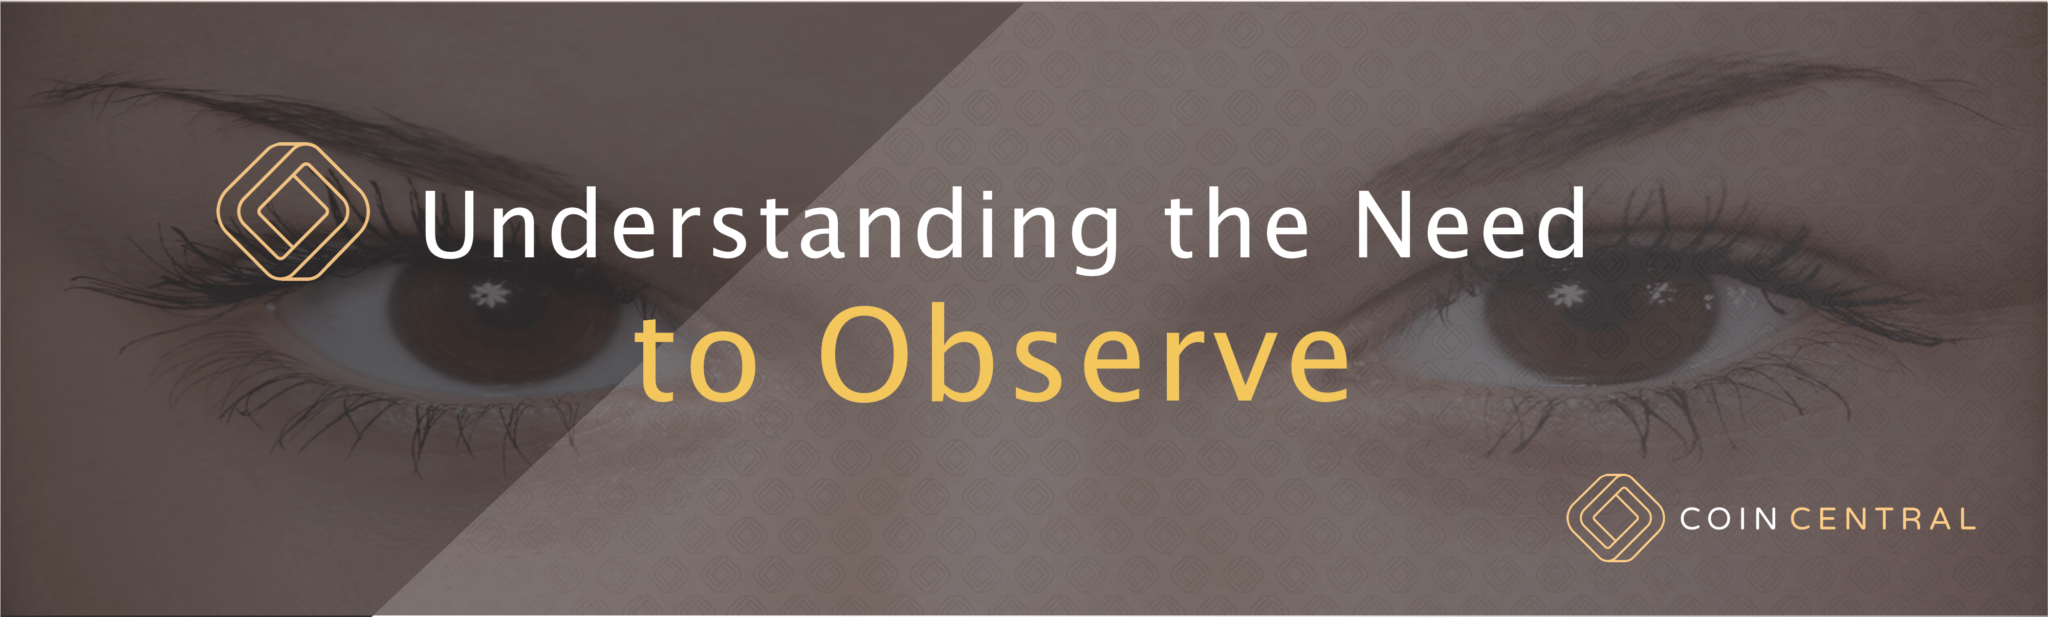 Understanding the Need to Observe